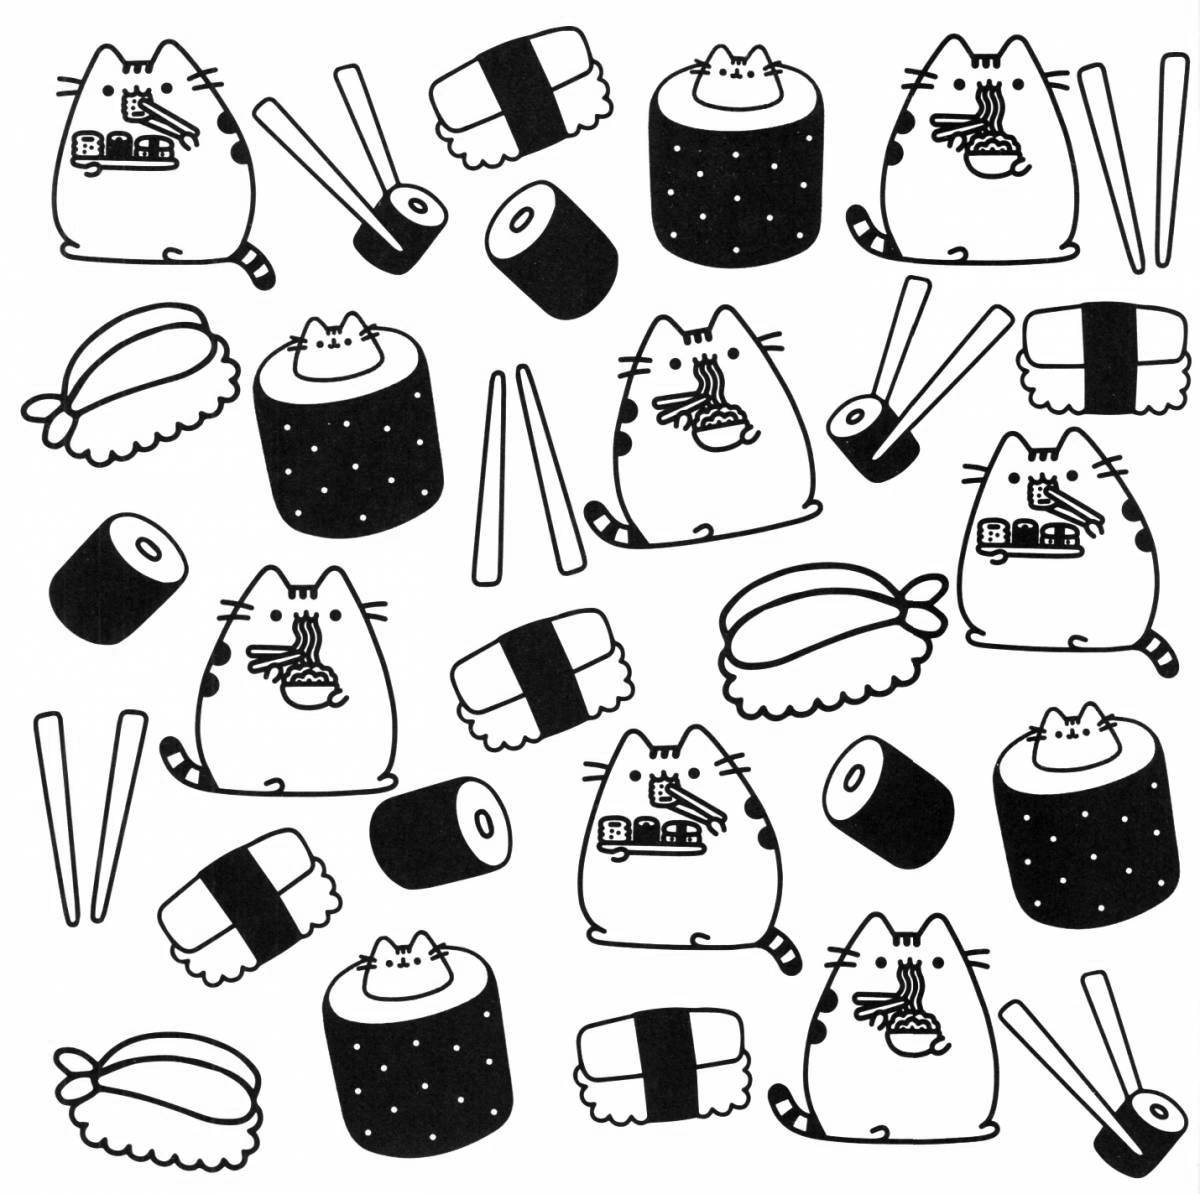 Fabulous sushi cat coloring page